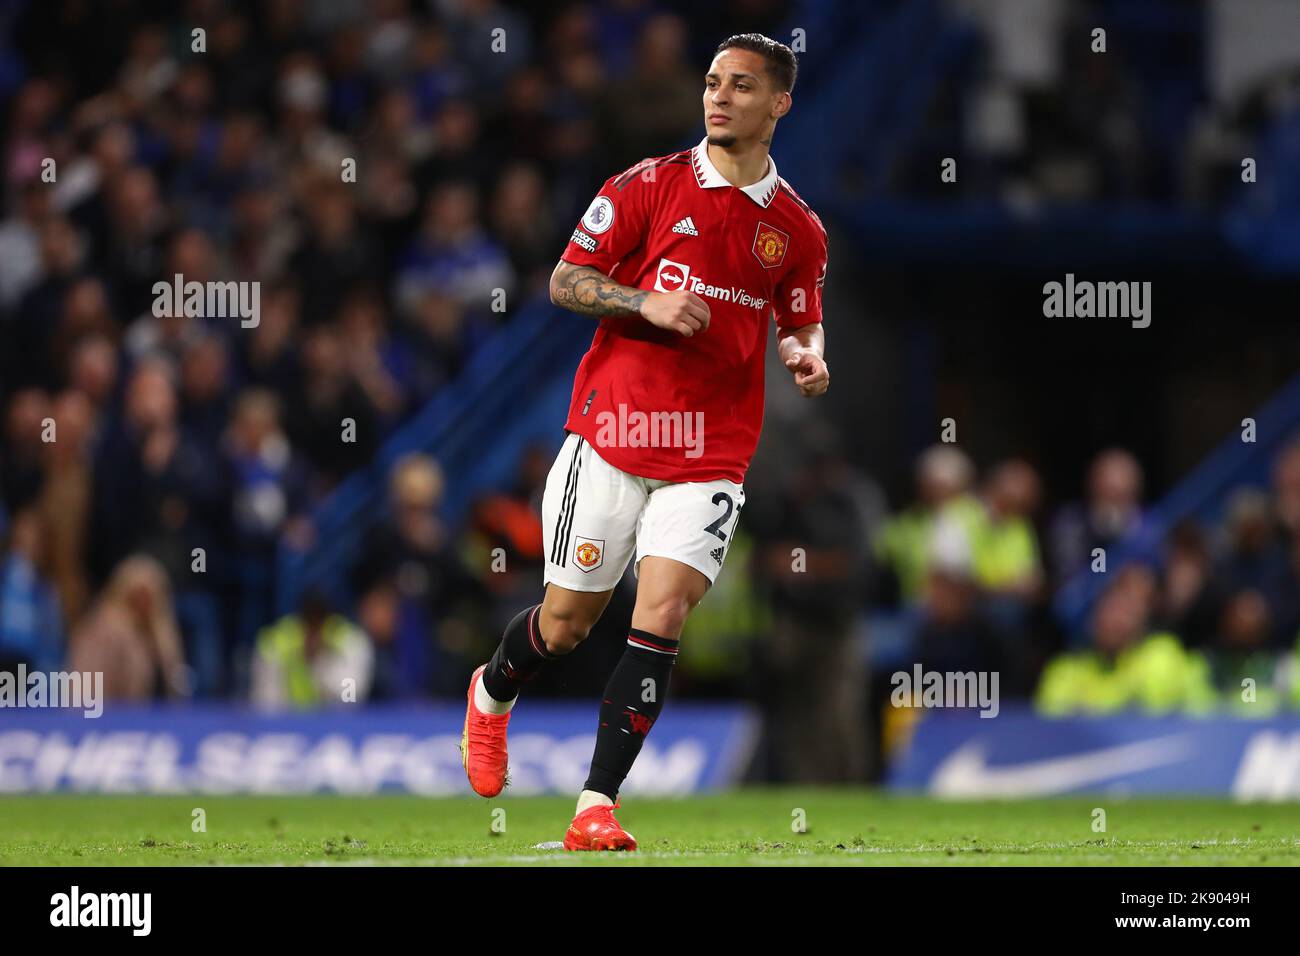 Antony of Manchester United - Chelsea v Manchester United, Premier League, Stamford Bridge, London, UK - 22nd October 2022  Editorial Use Only - DataCo restrictions apply Stock Photo